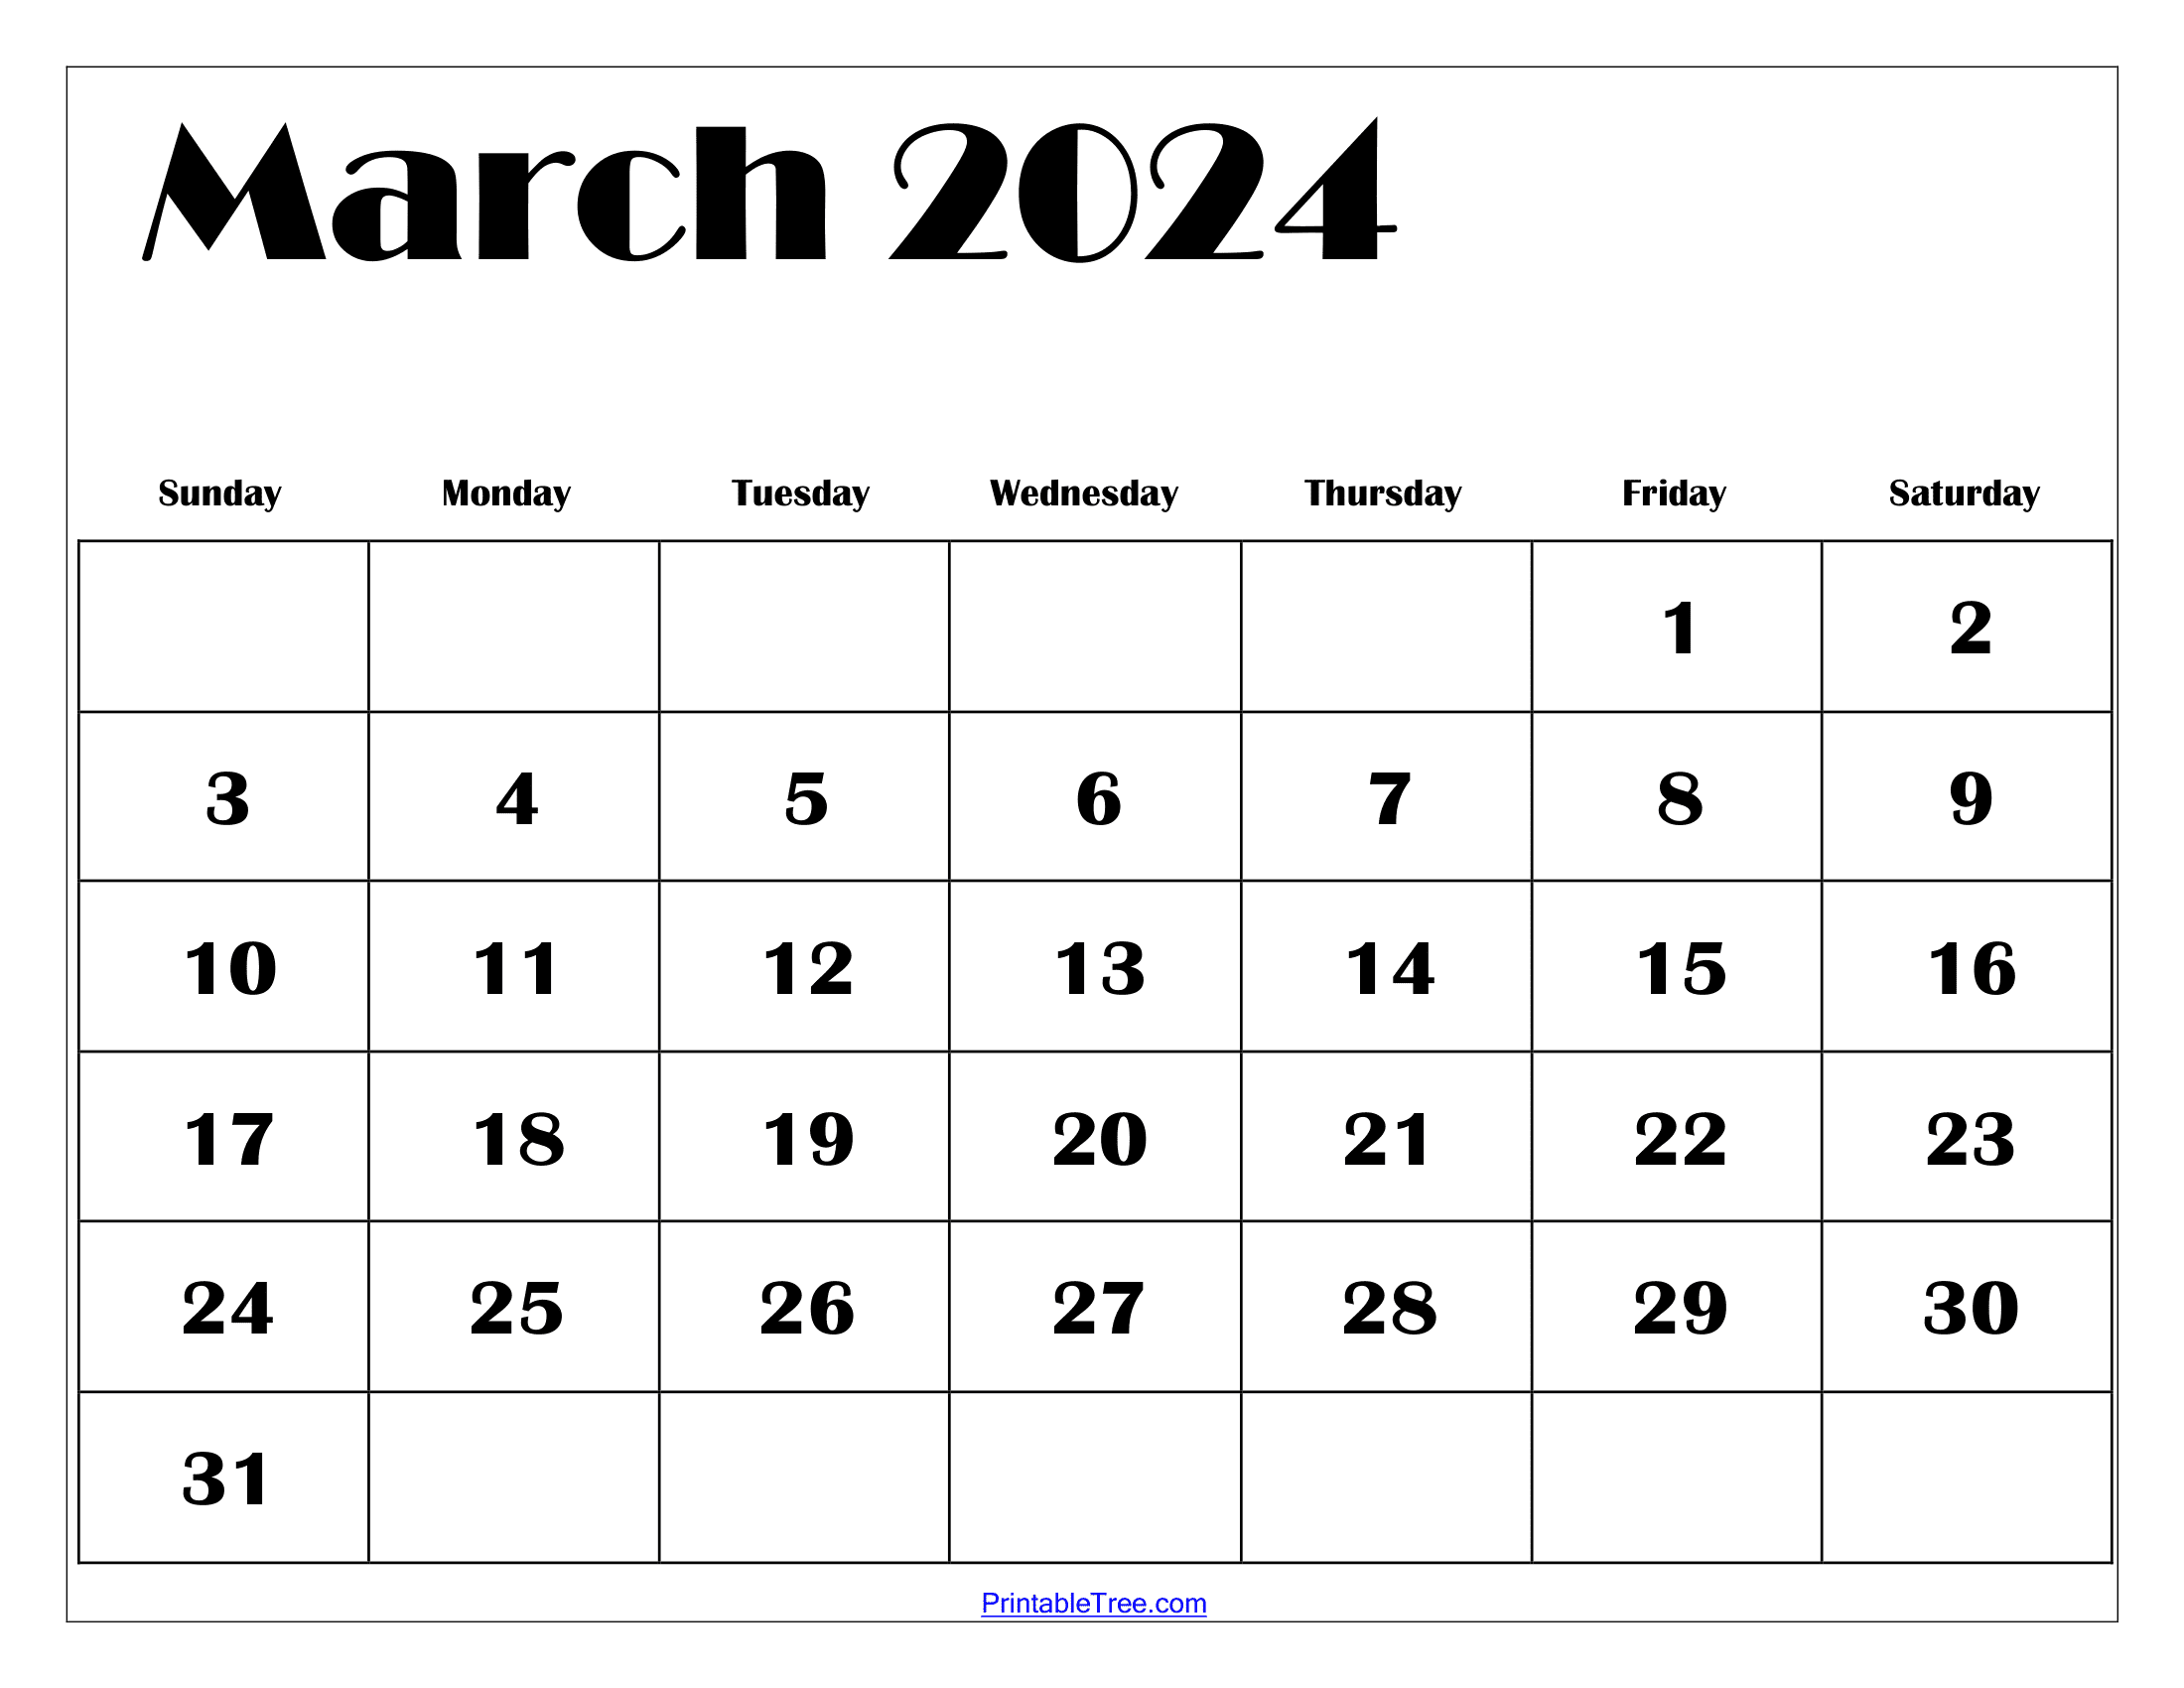 March 2024 Calendar Printable Pdf With Holidays Template Free for 2024 Calendar Printable March